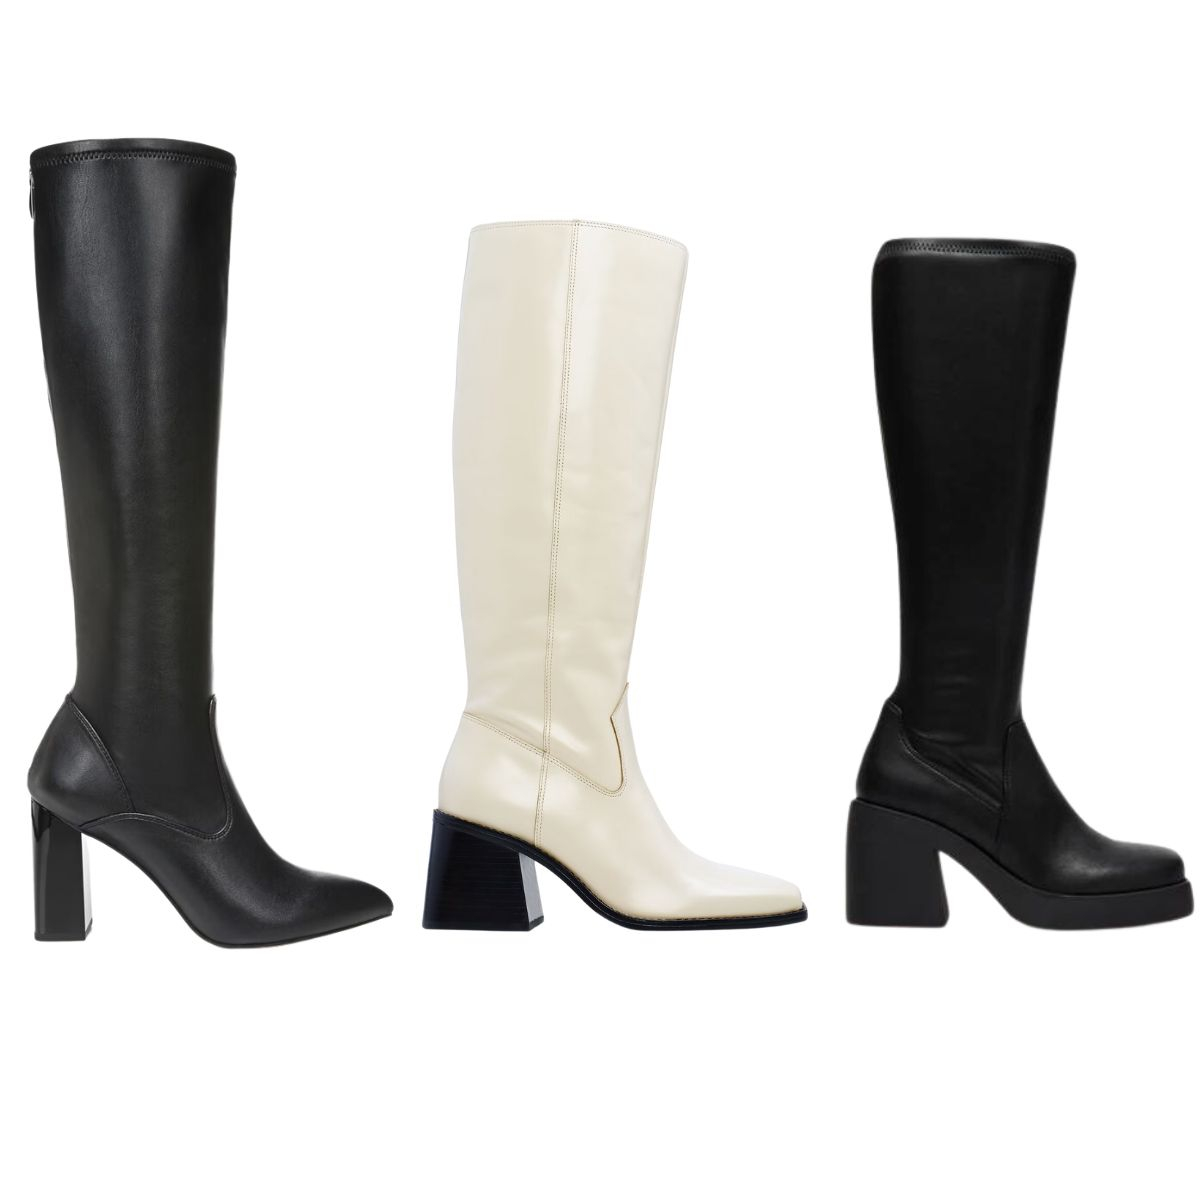 These Are the Best Wide Calf Boots According to Reviewers